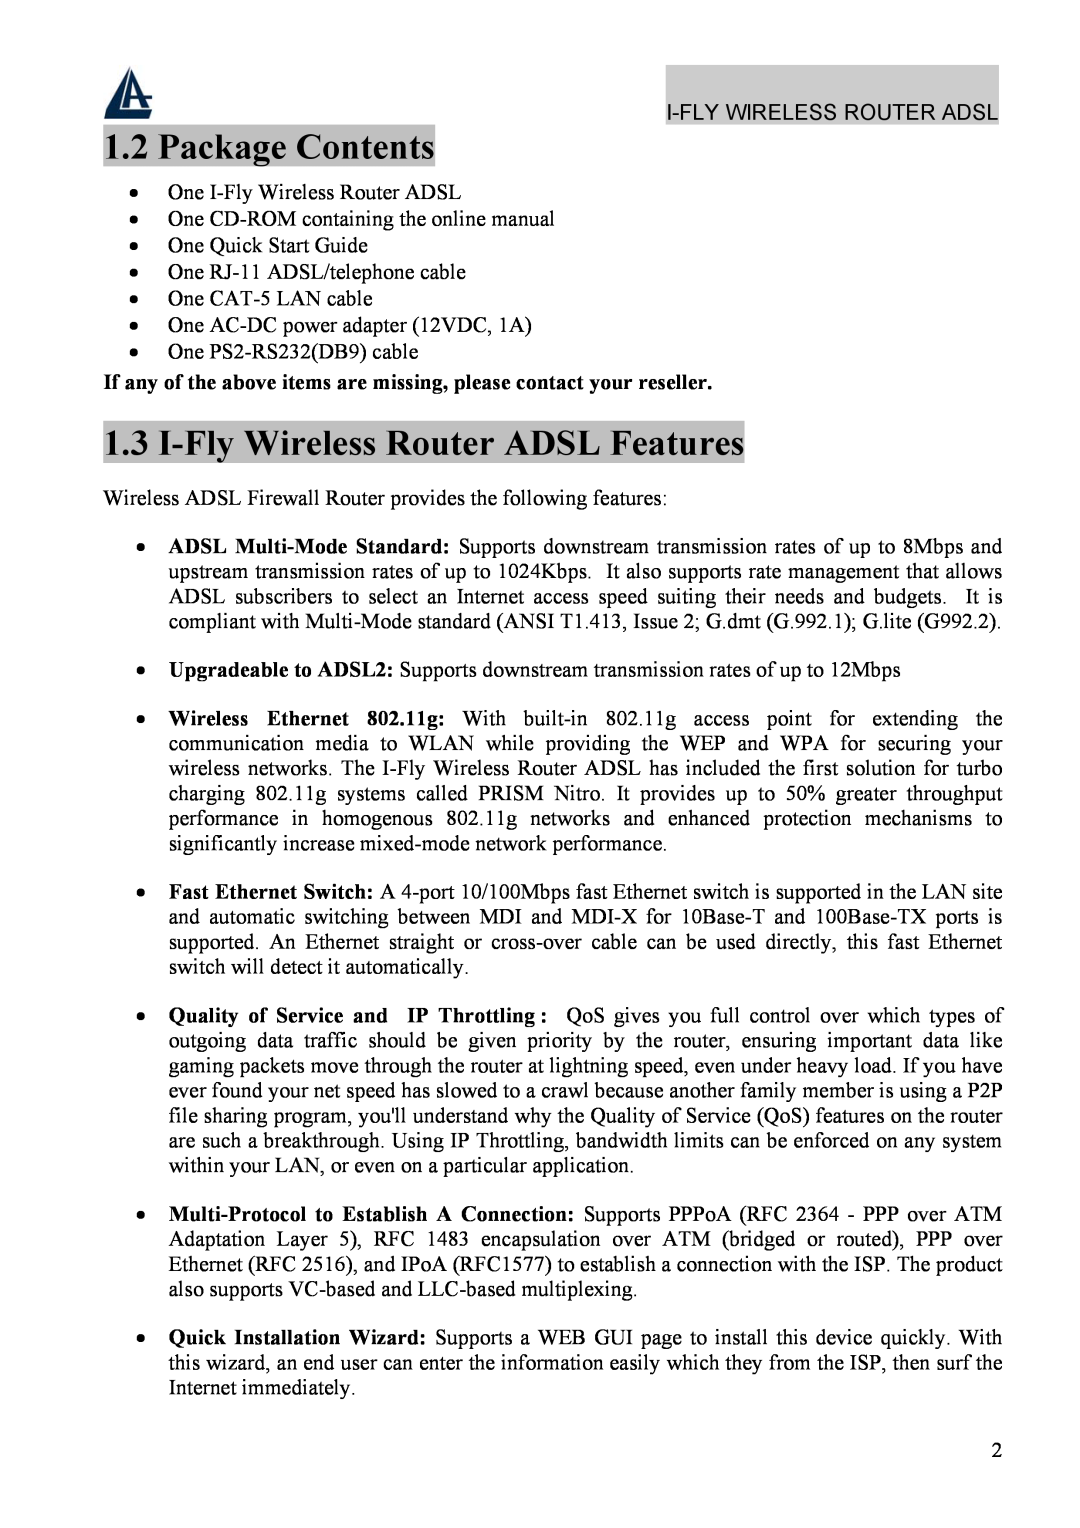 Atlantis Land A02-WRA4-54G manual Package Contents, I-Fly Wireless Router ADSL Features 